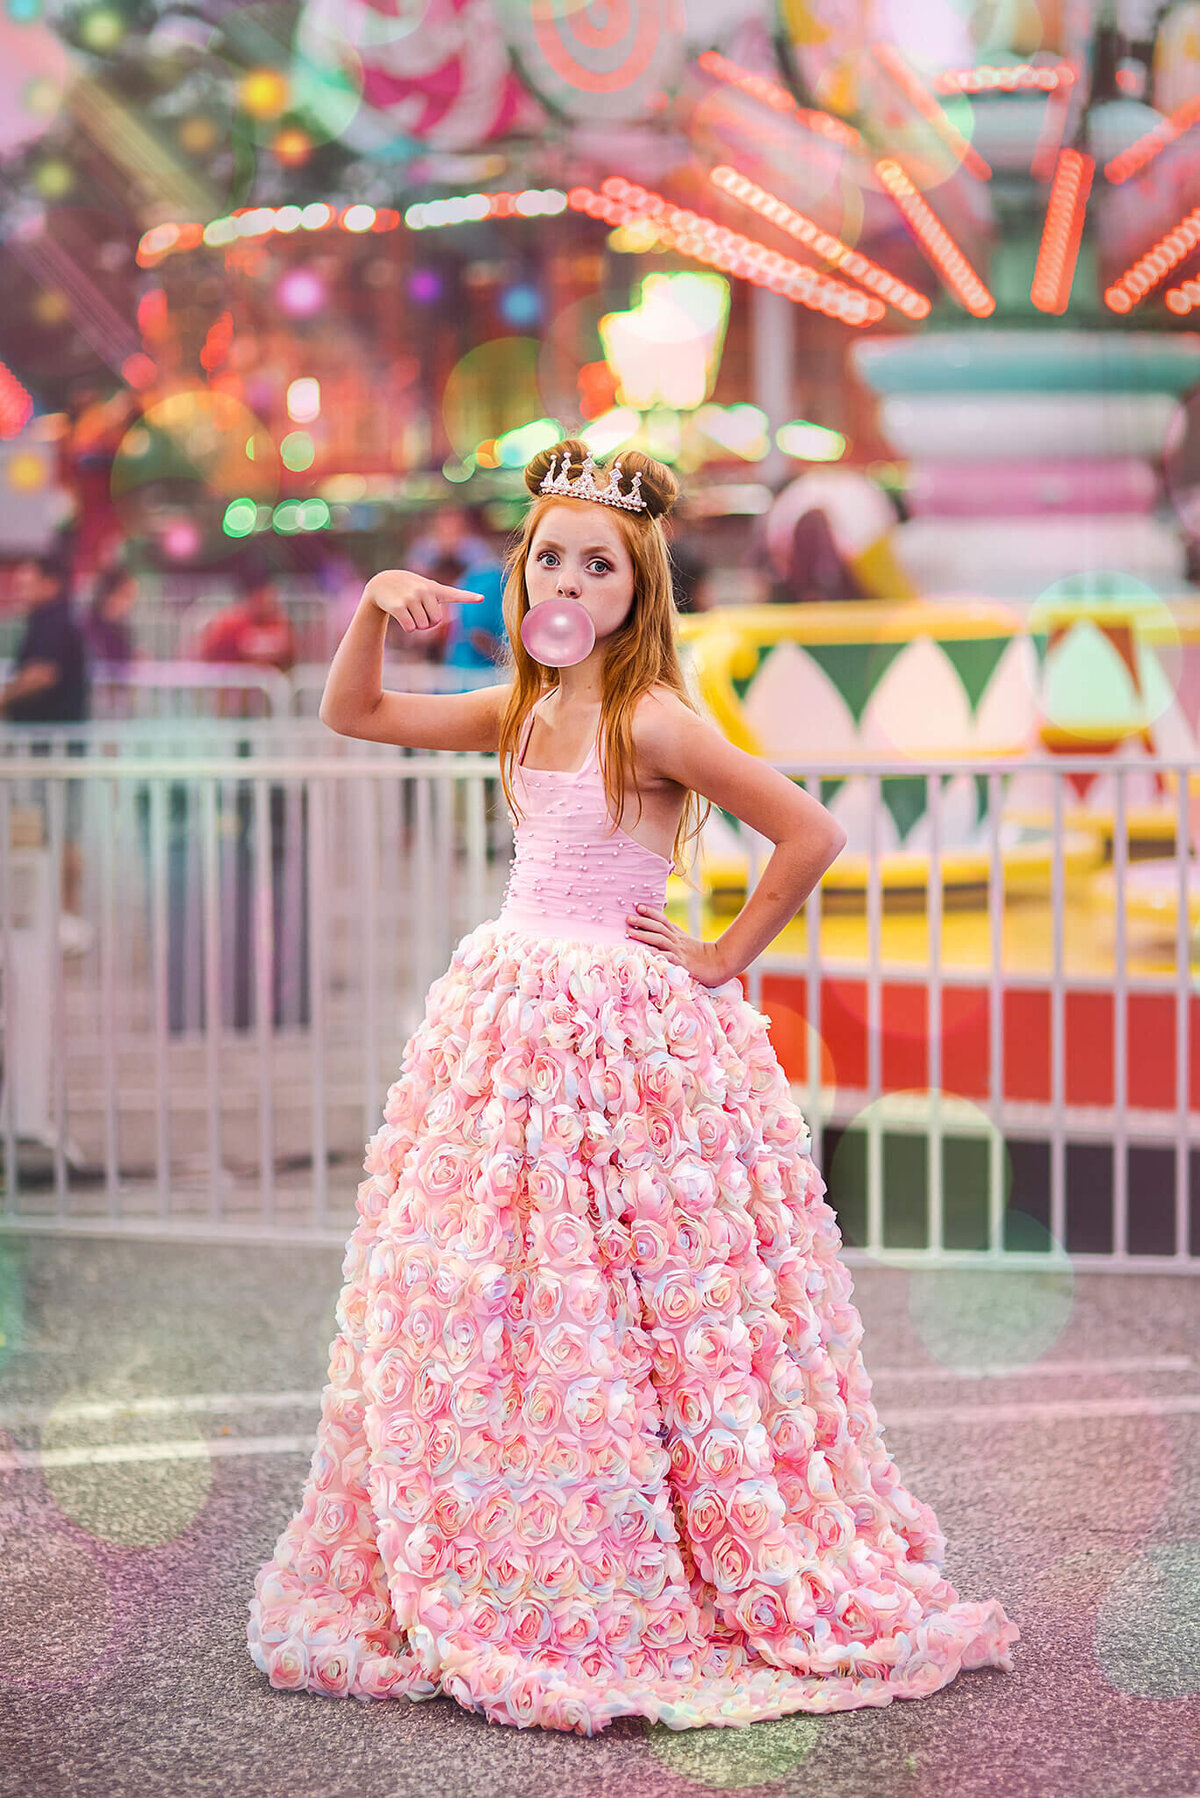 Red haired girl in a rainbow pink dress at a carnival blowing a bubble gum bubble near Annapolis Maryland